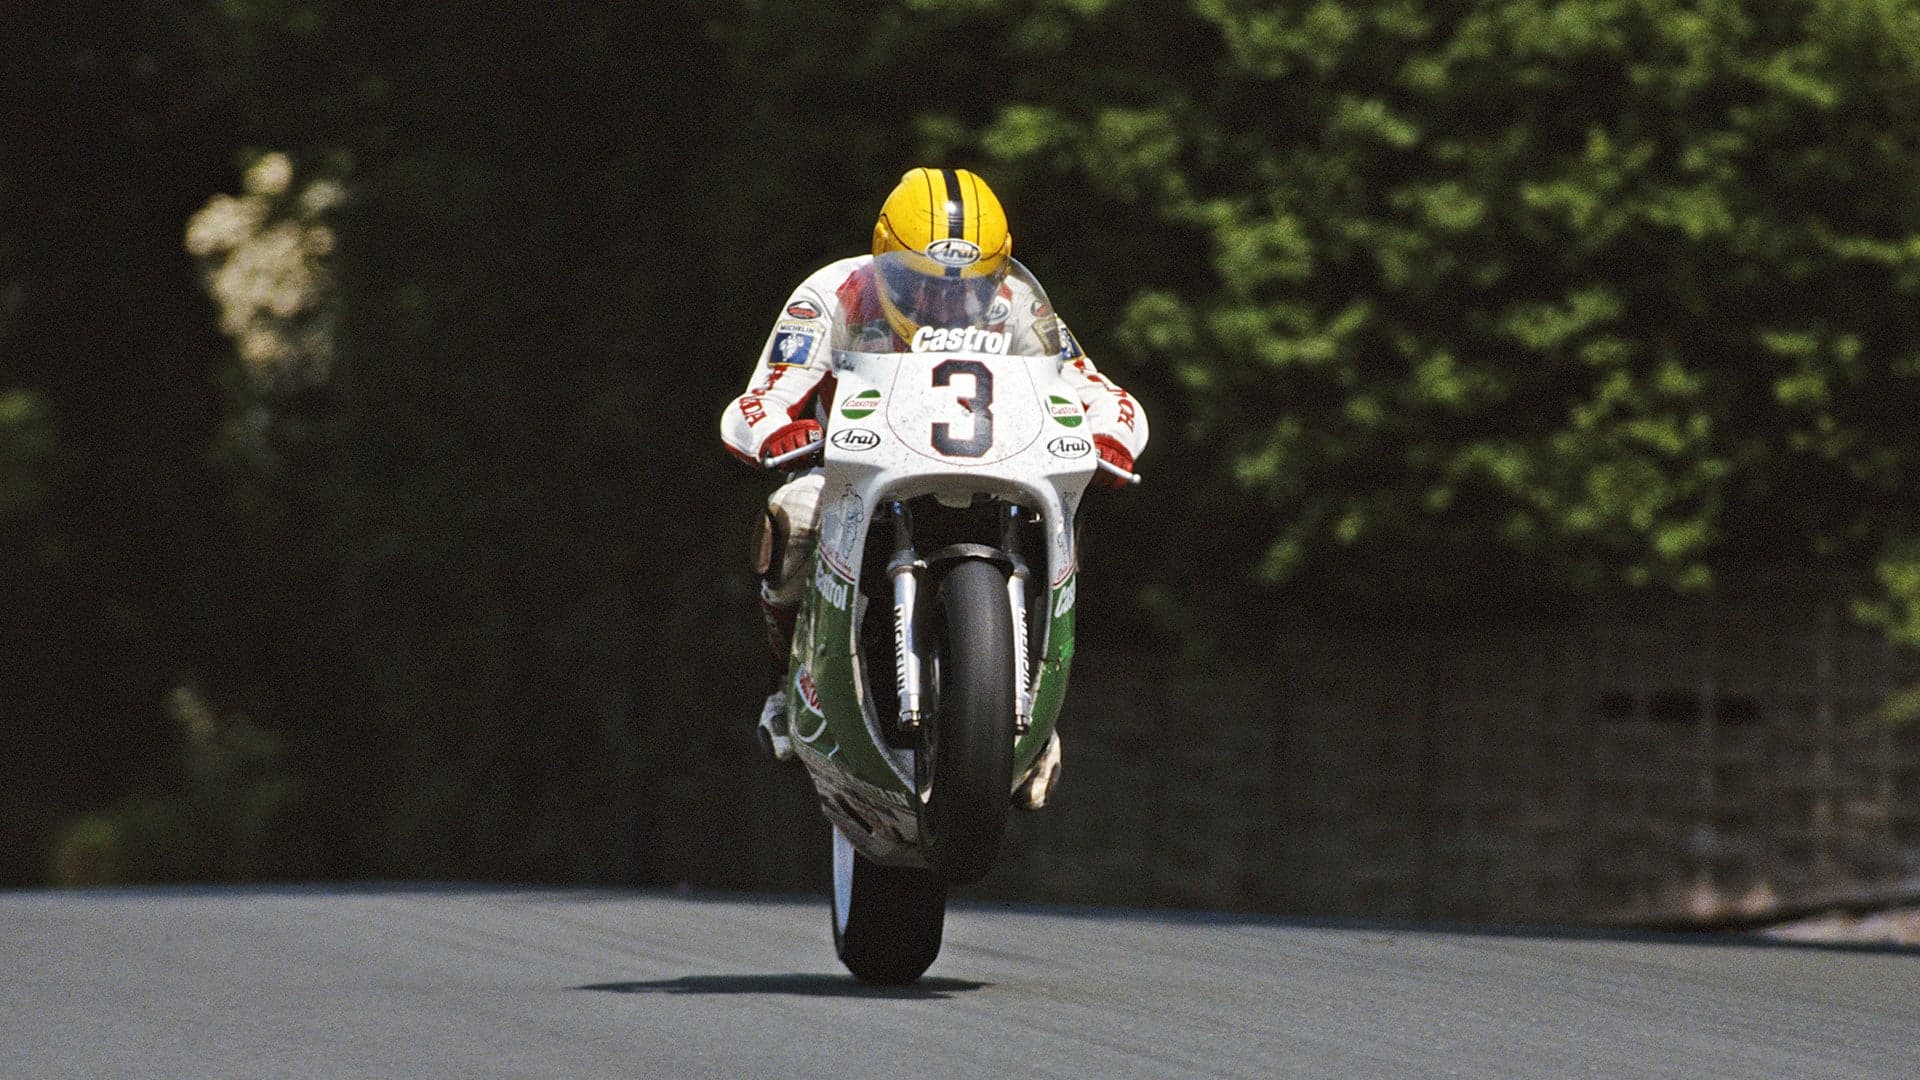 A Gearhead’s St. Patrick’s Day Celebration of Joey Dunlop, Northern Ireland’s Motorcycling Hero